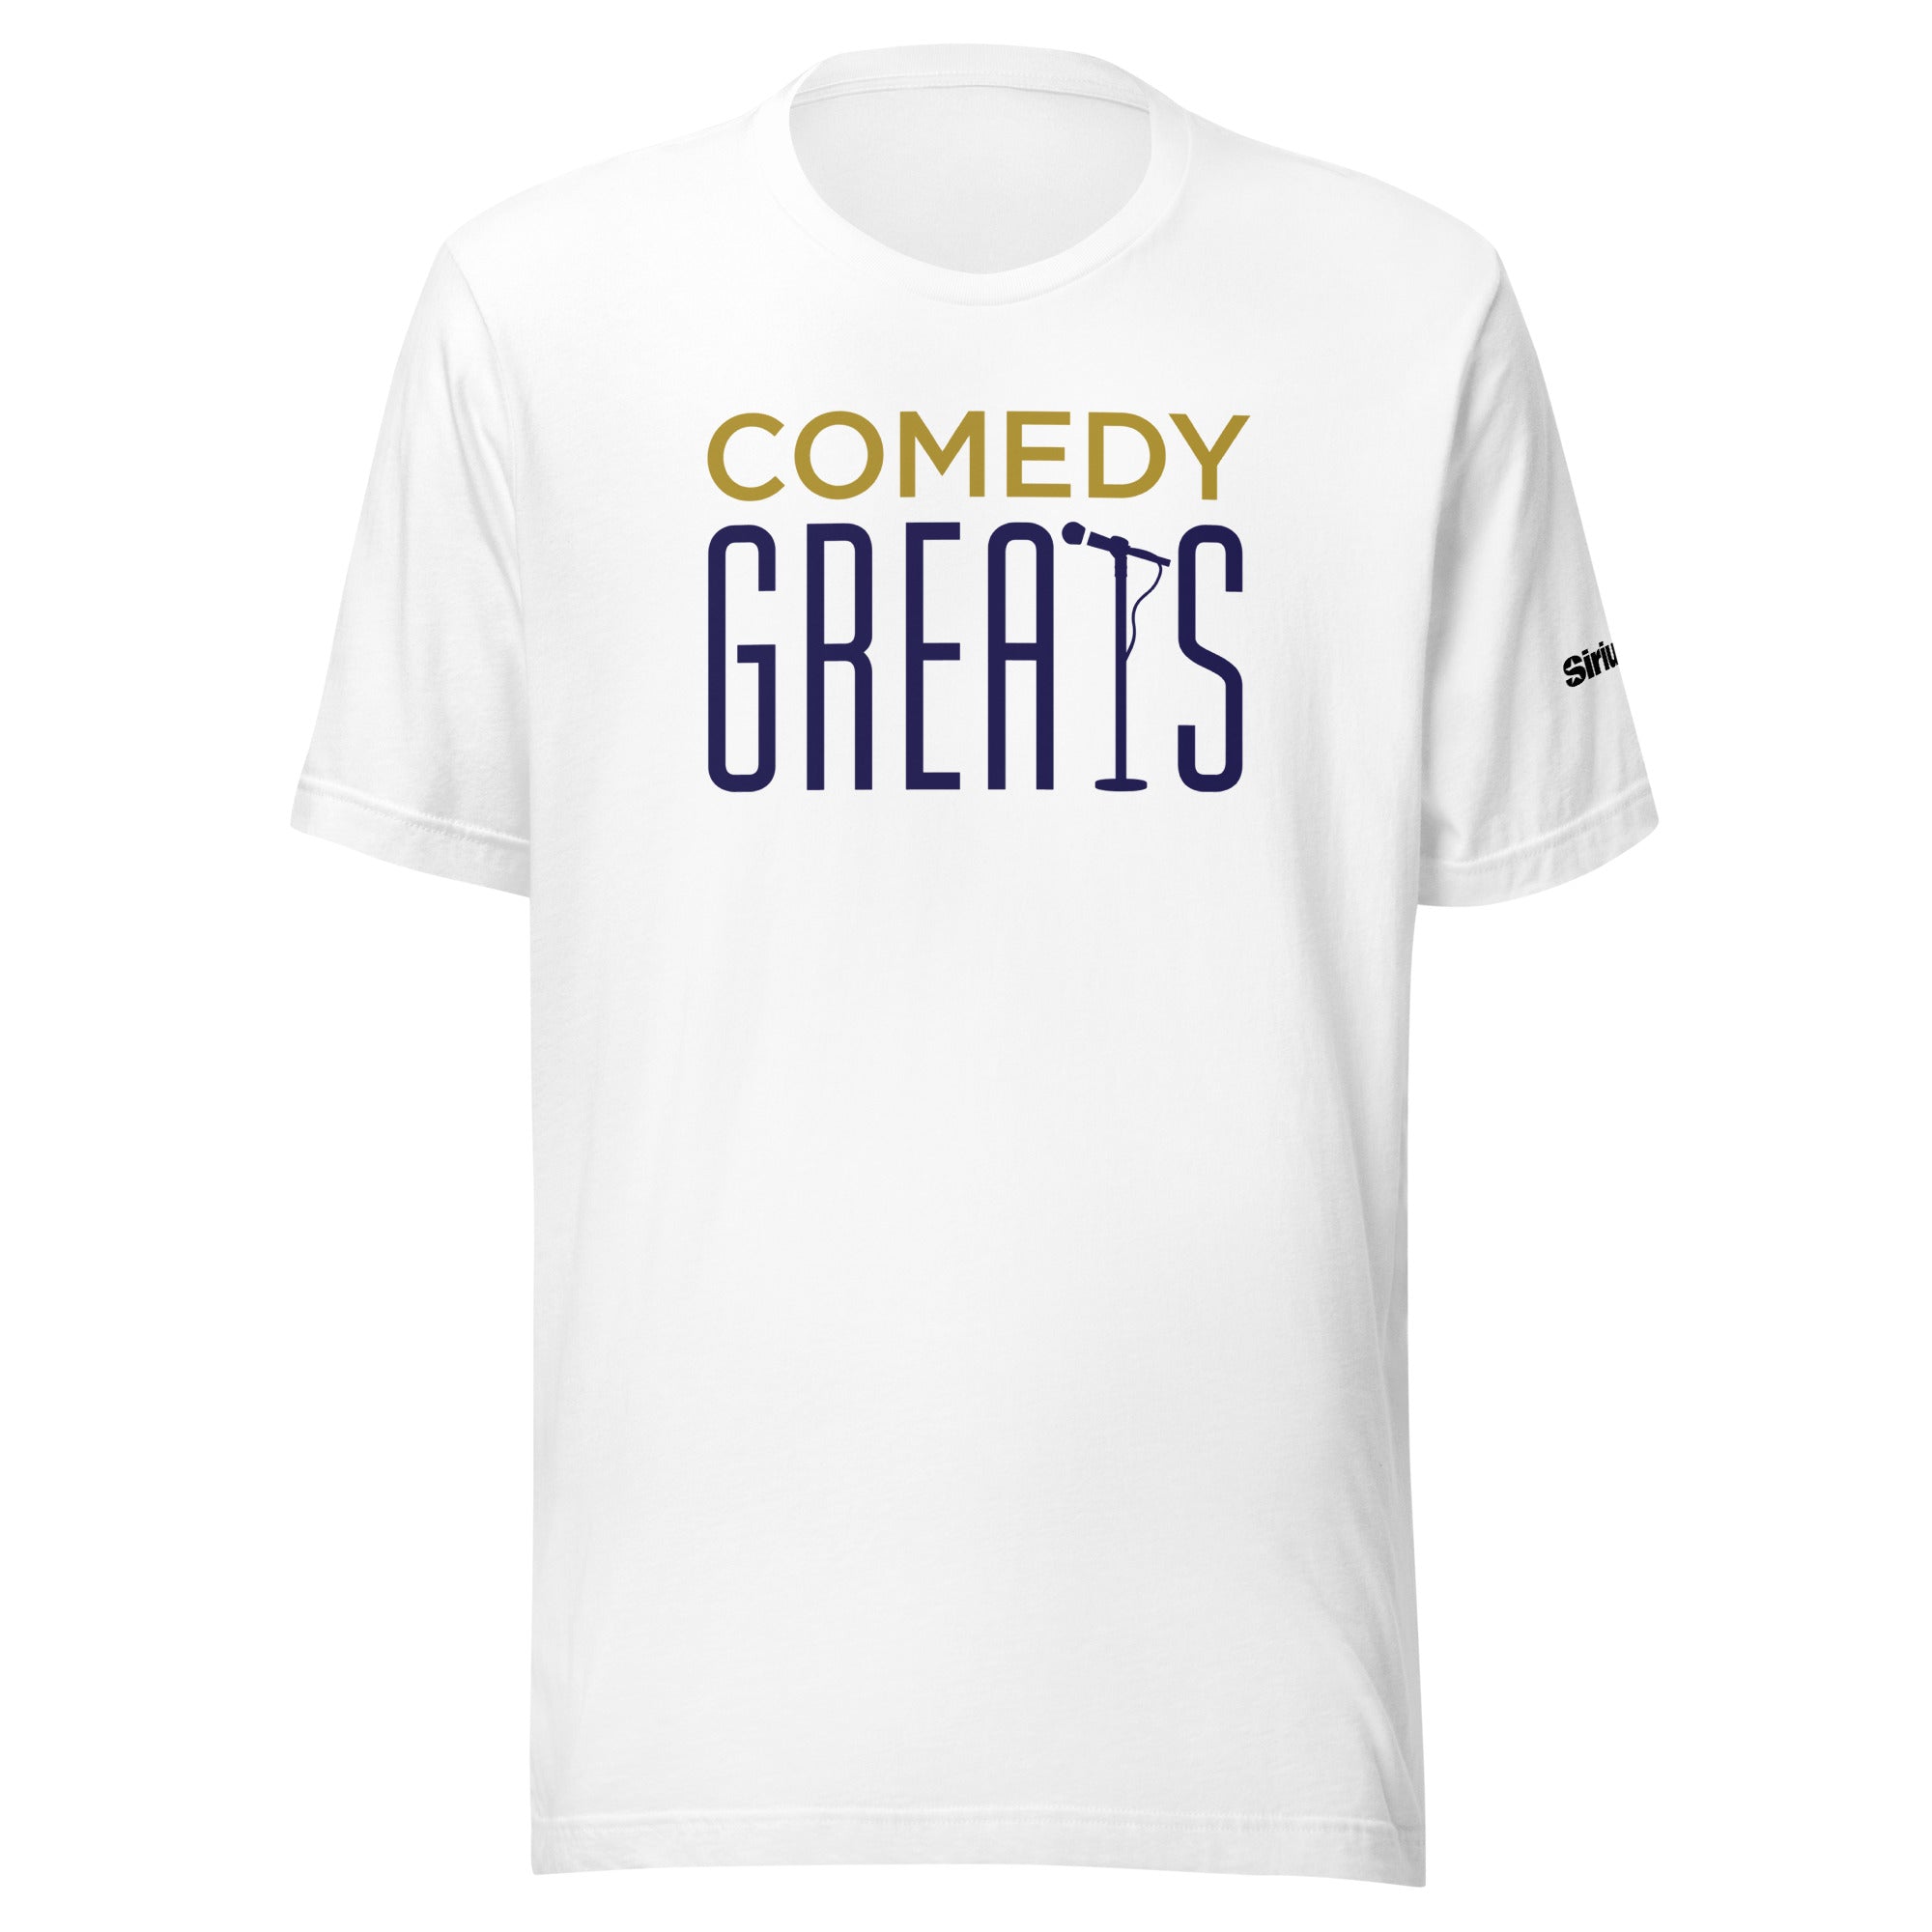 Comedy Greats: T-shirt (White)